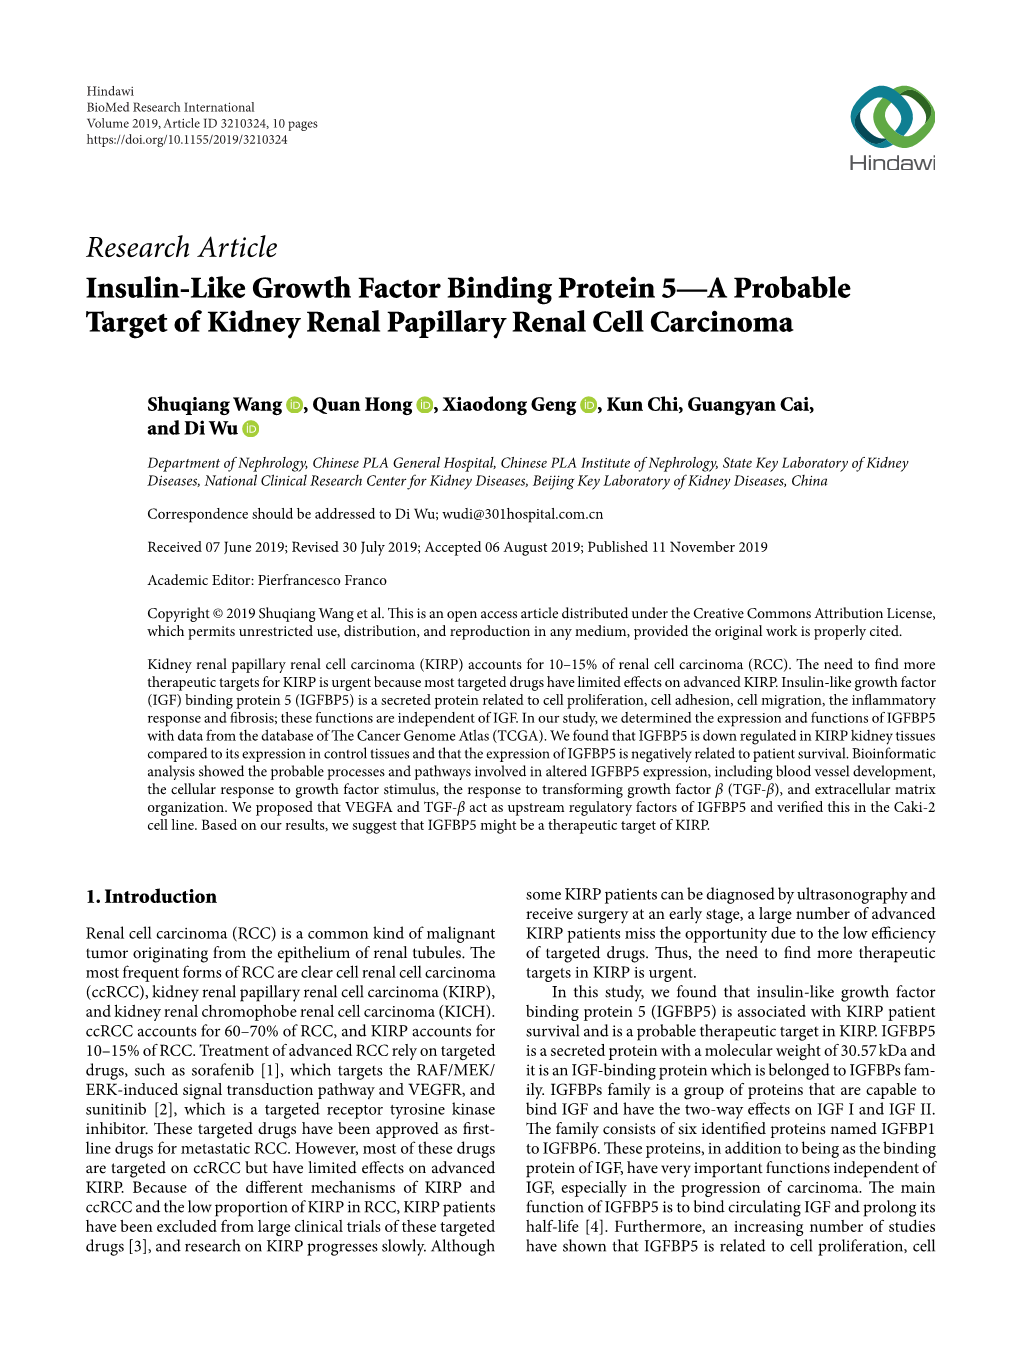 Insulin-Like Growth Factor Binding Protein 5—A Probable Target of Kidney Renal Papillary Renal Cell Carcinoma